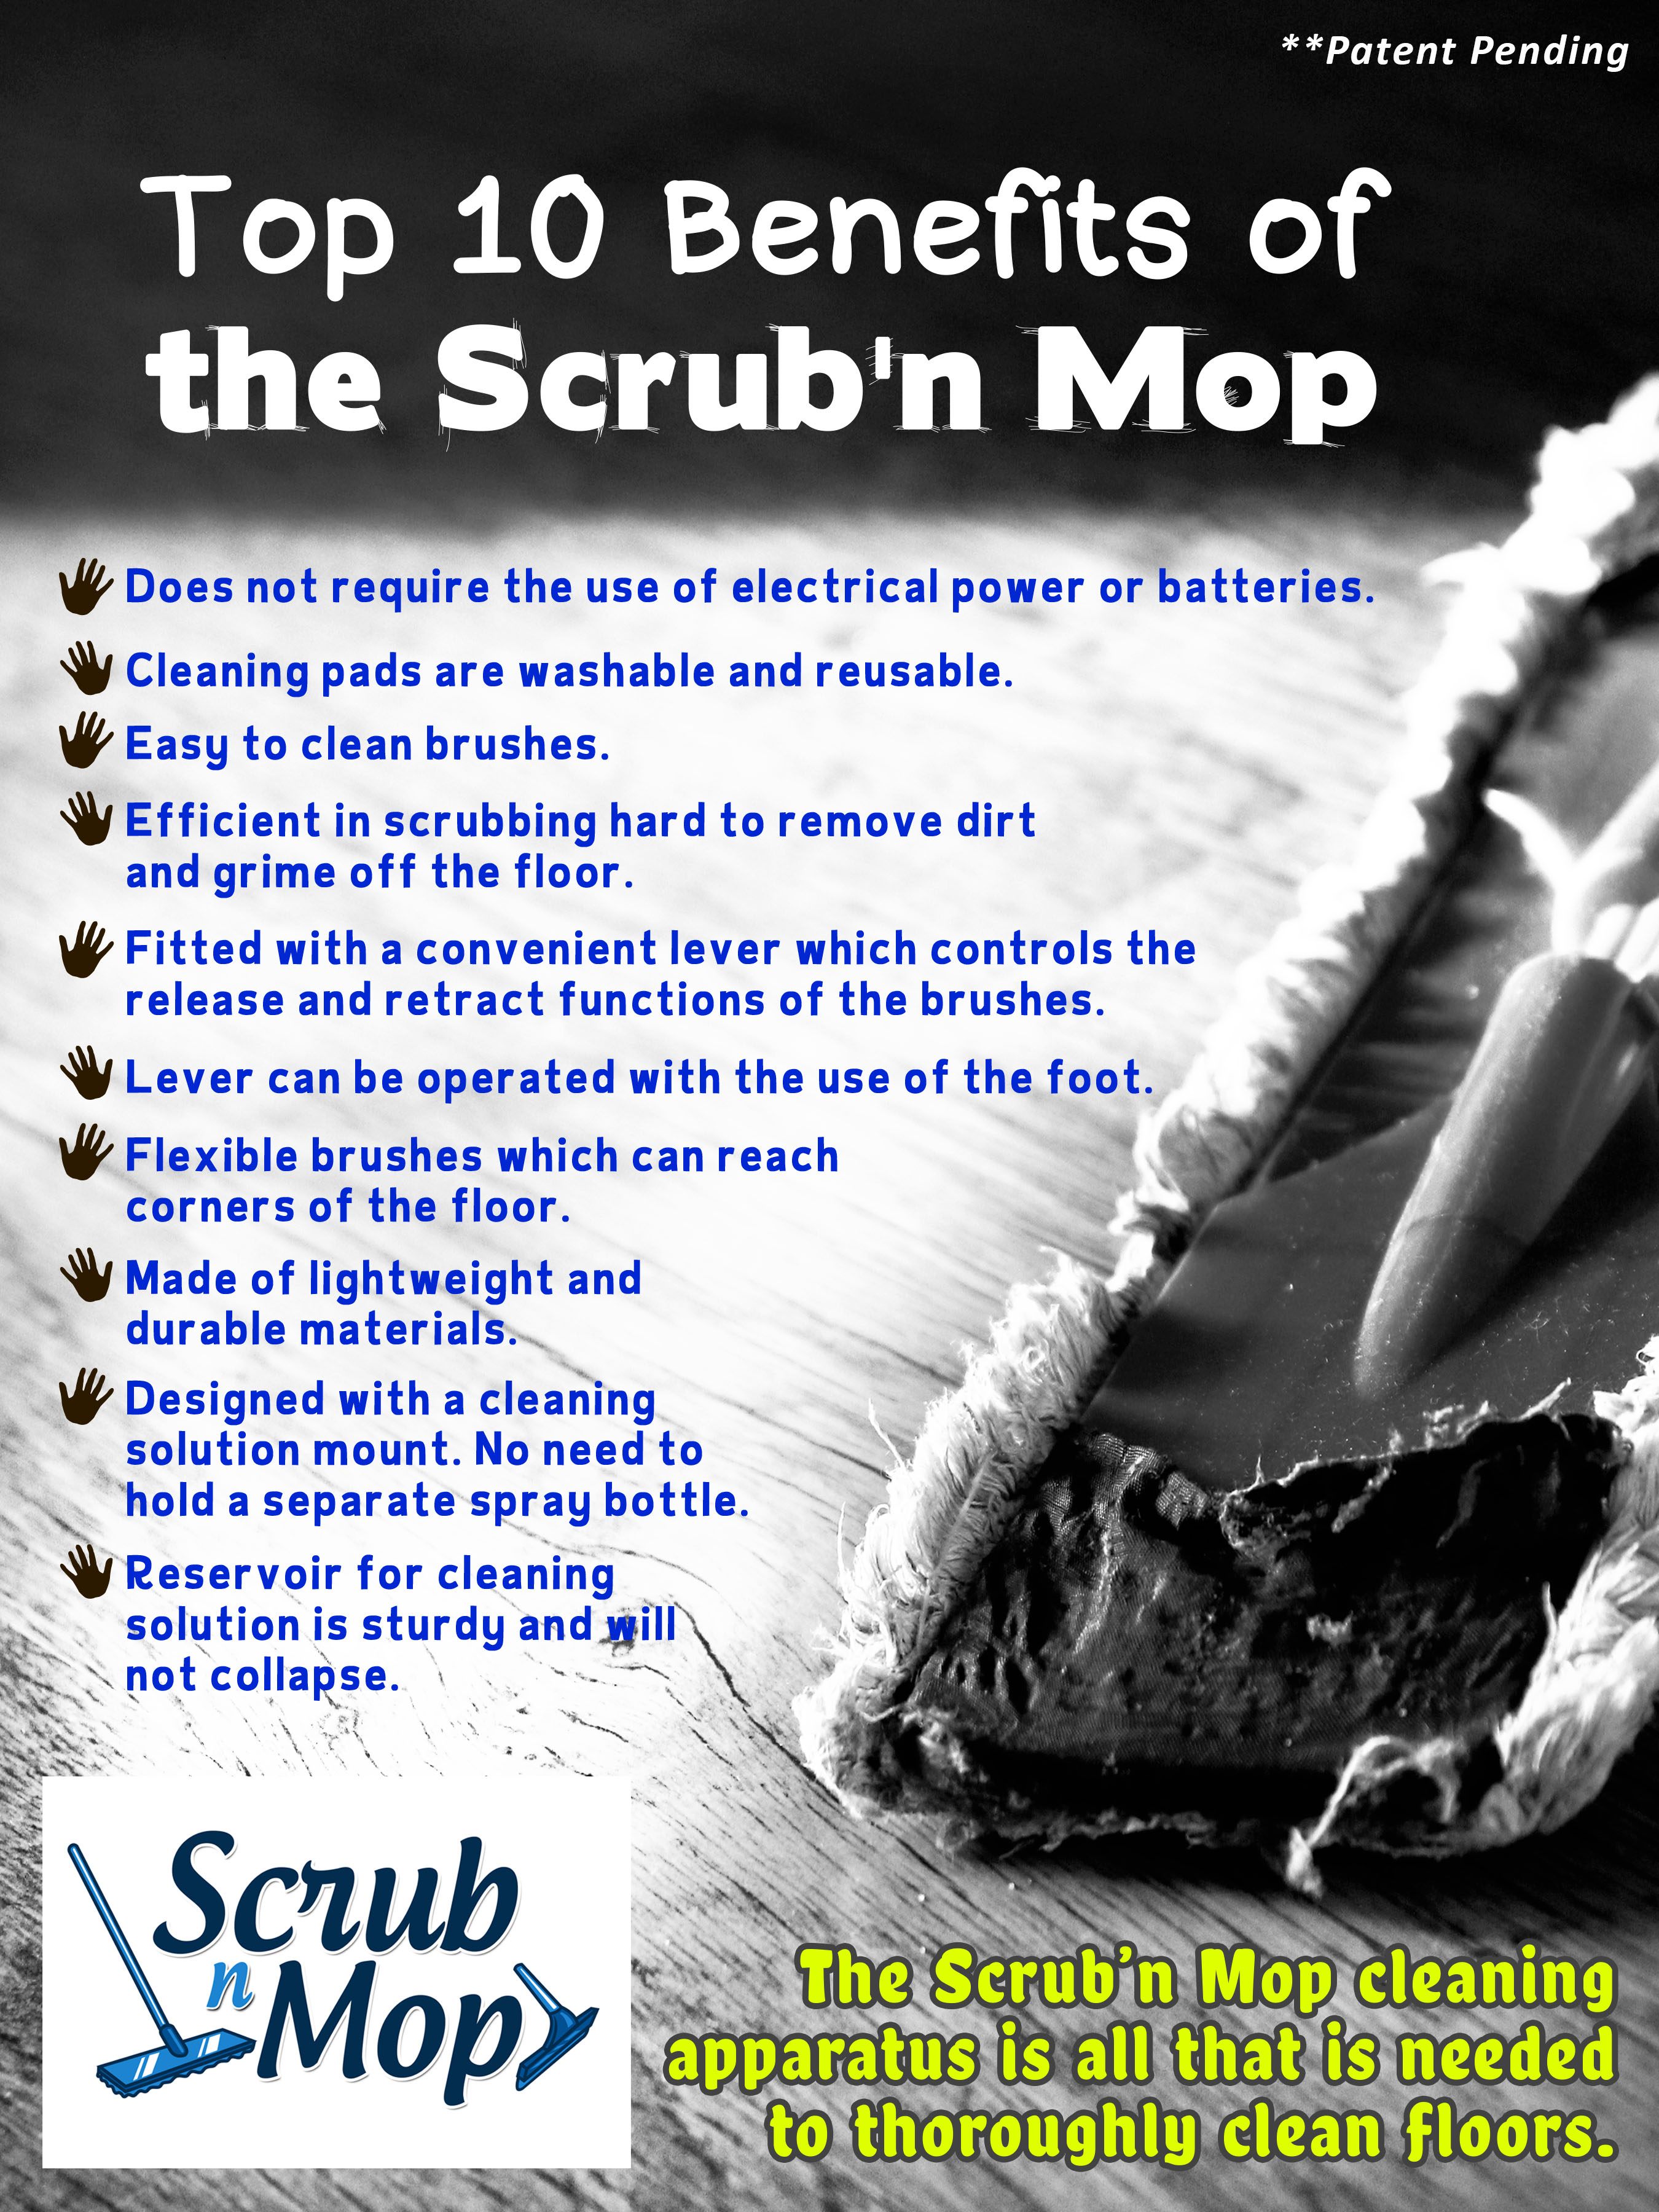 not only does it provide mopping features, it has scrubbing functions which prevent users from getting down on their knees